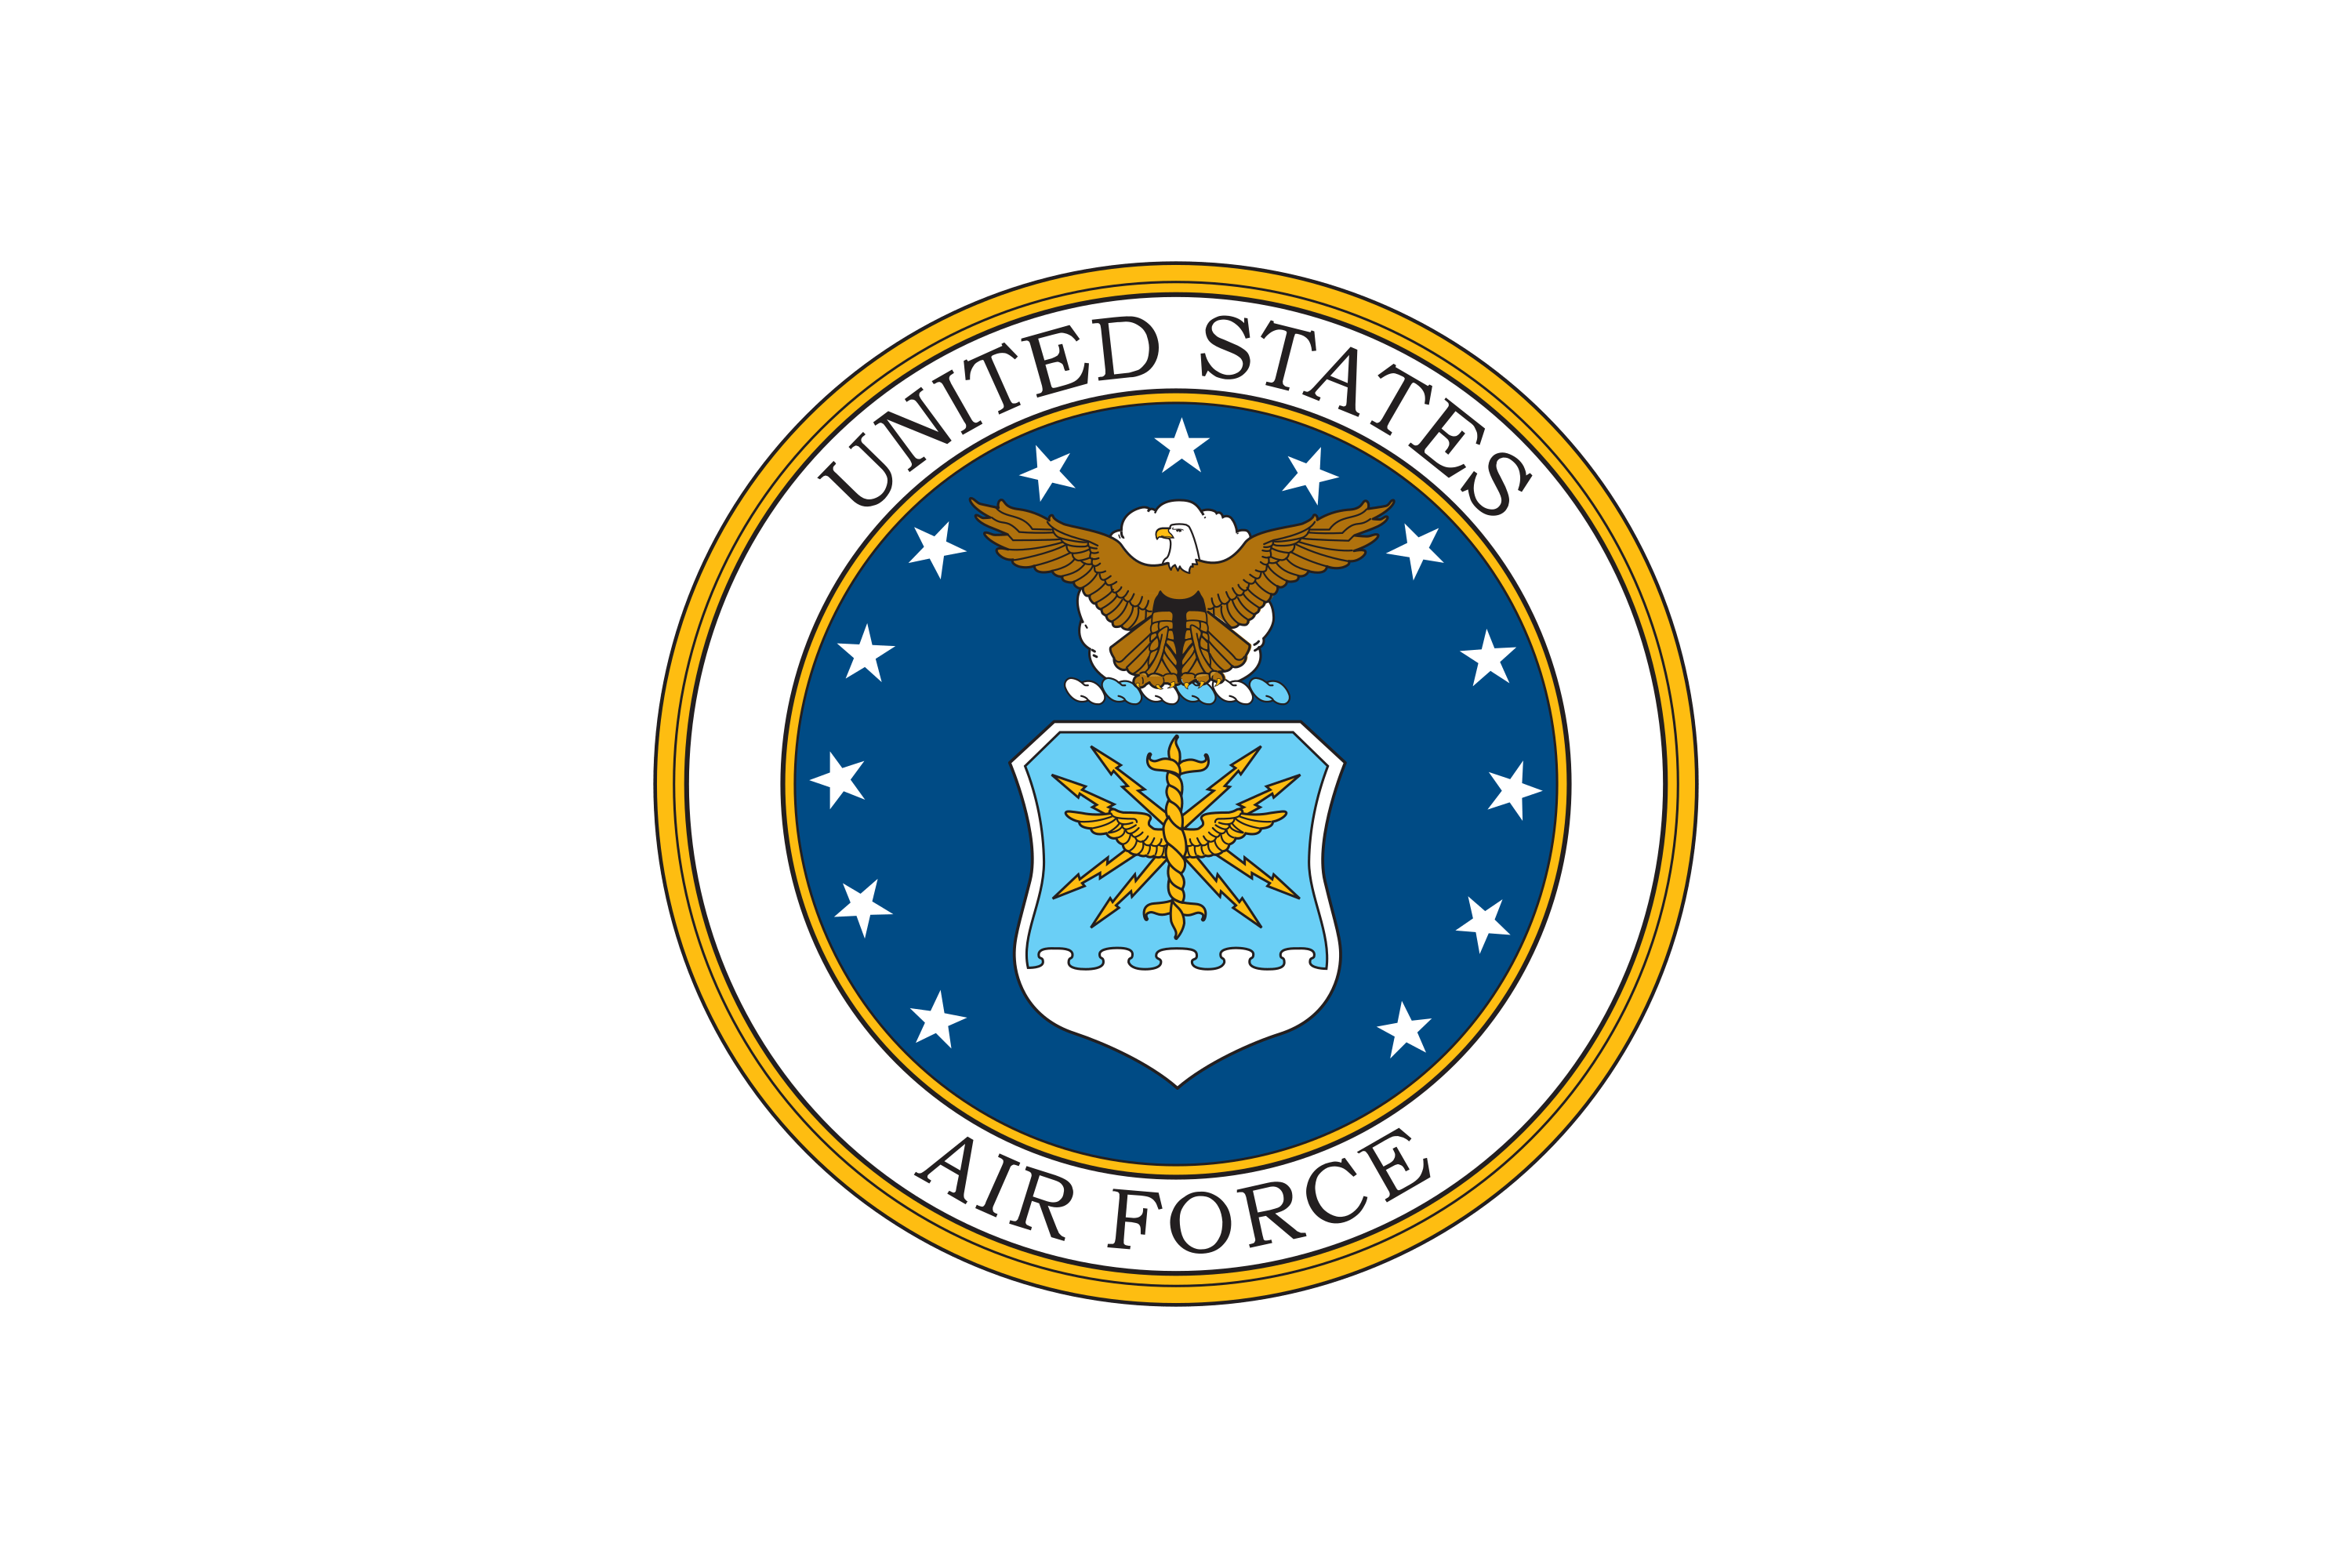 Download United States Air Force (USAF) Logo In SVG Vector Or PNG File